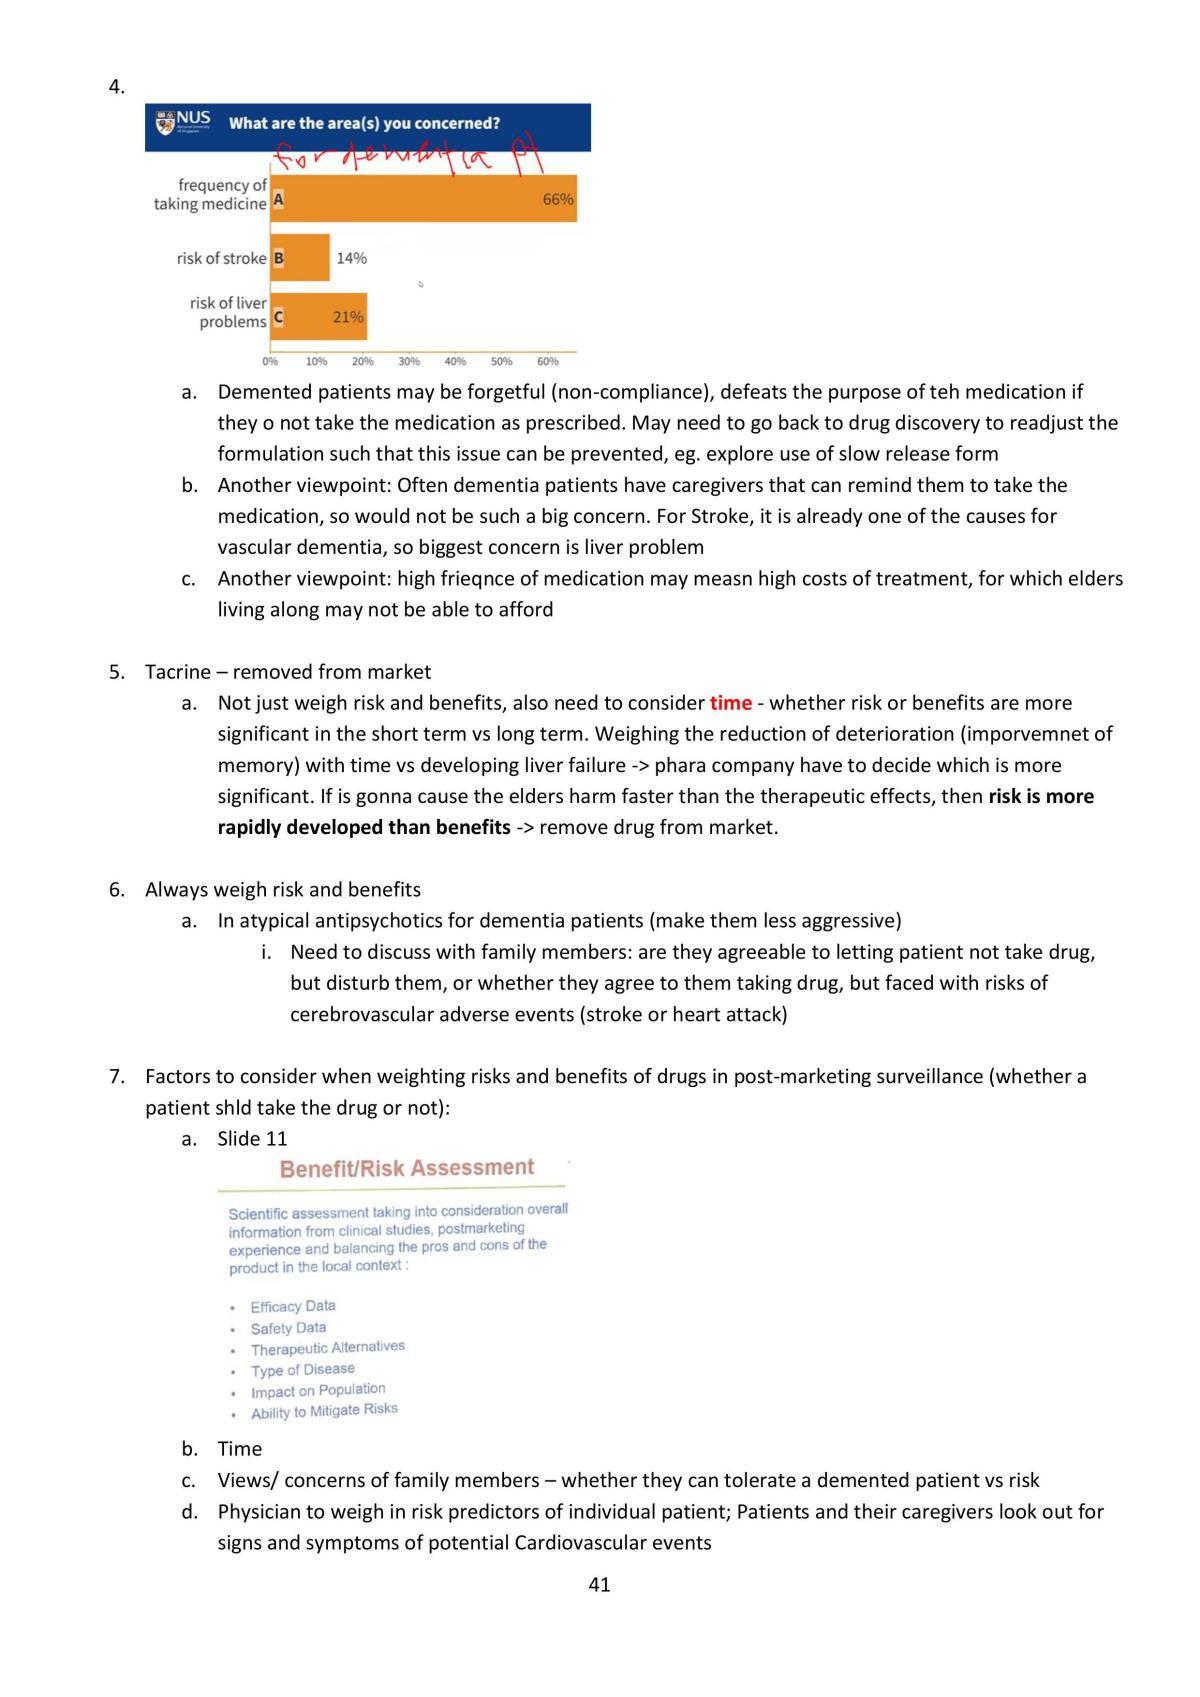 Study notes - Page 41